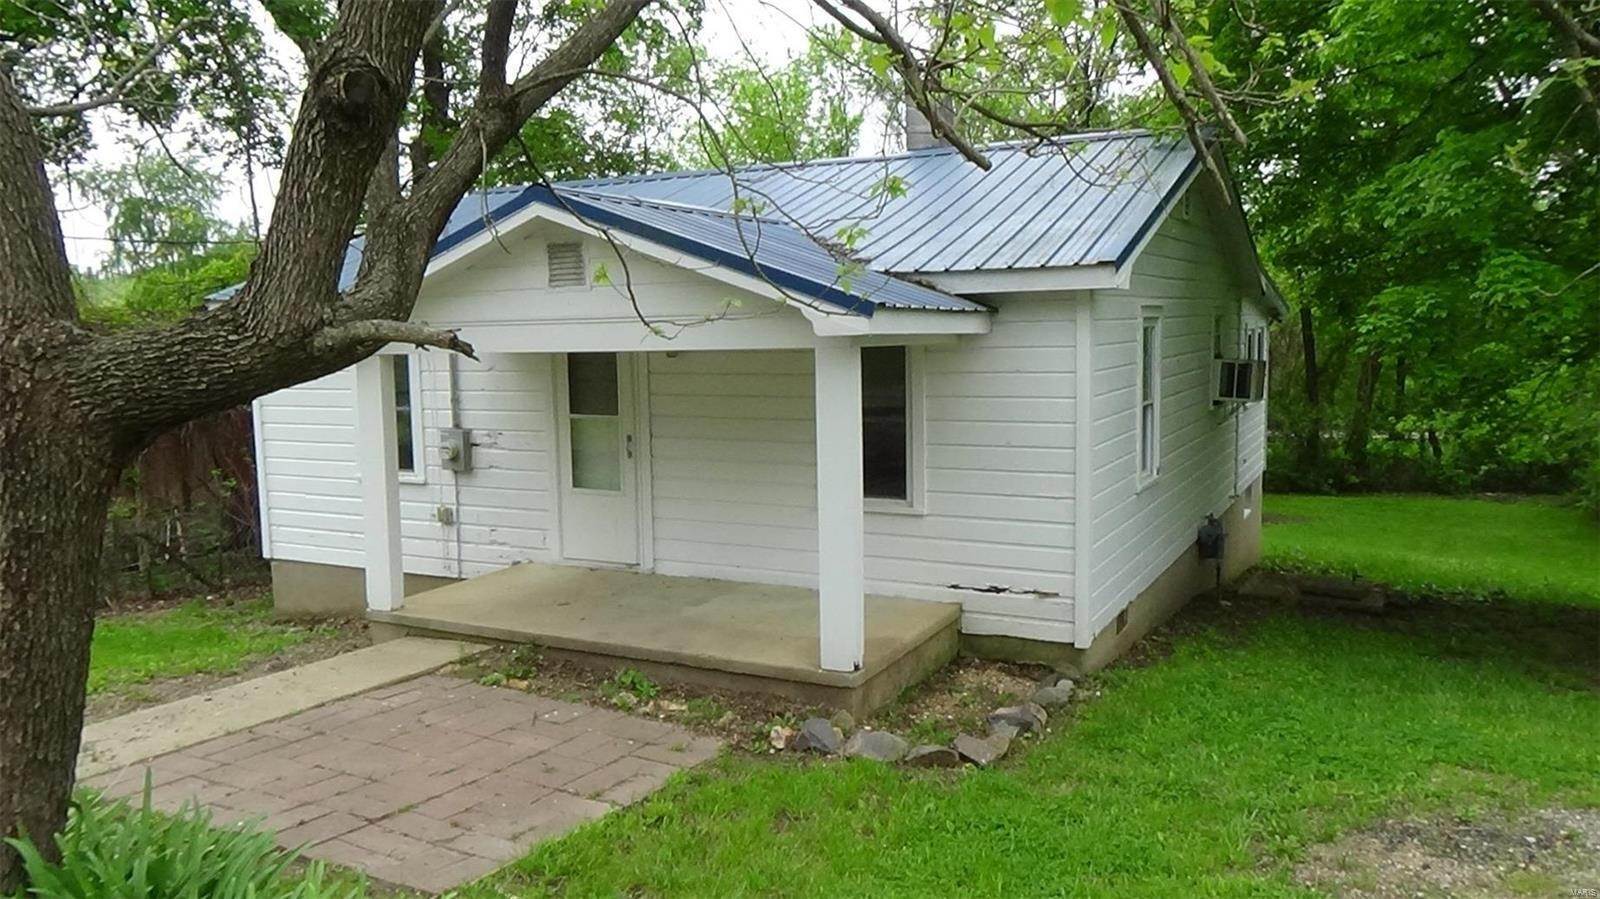 Property for Sale at 512 E 2nd Street Annapolis, Missouri 63620 United States